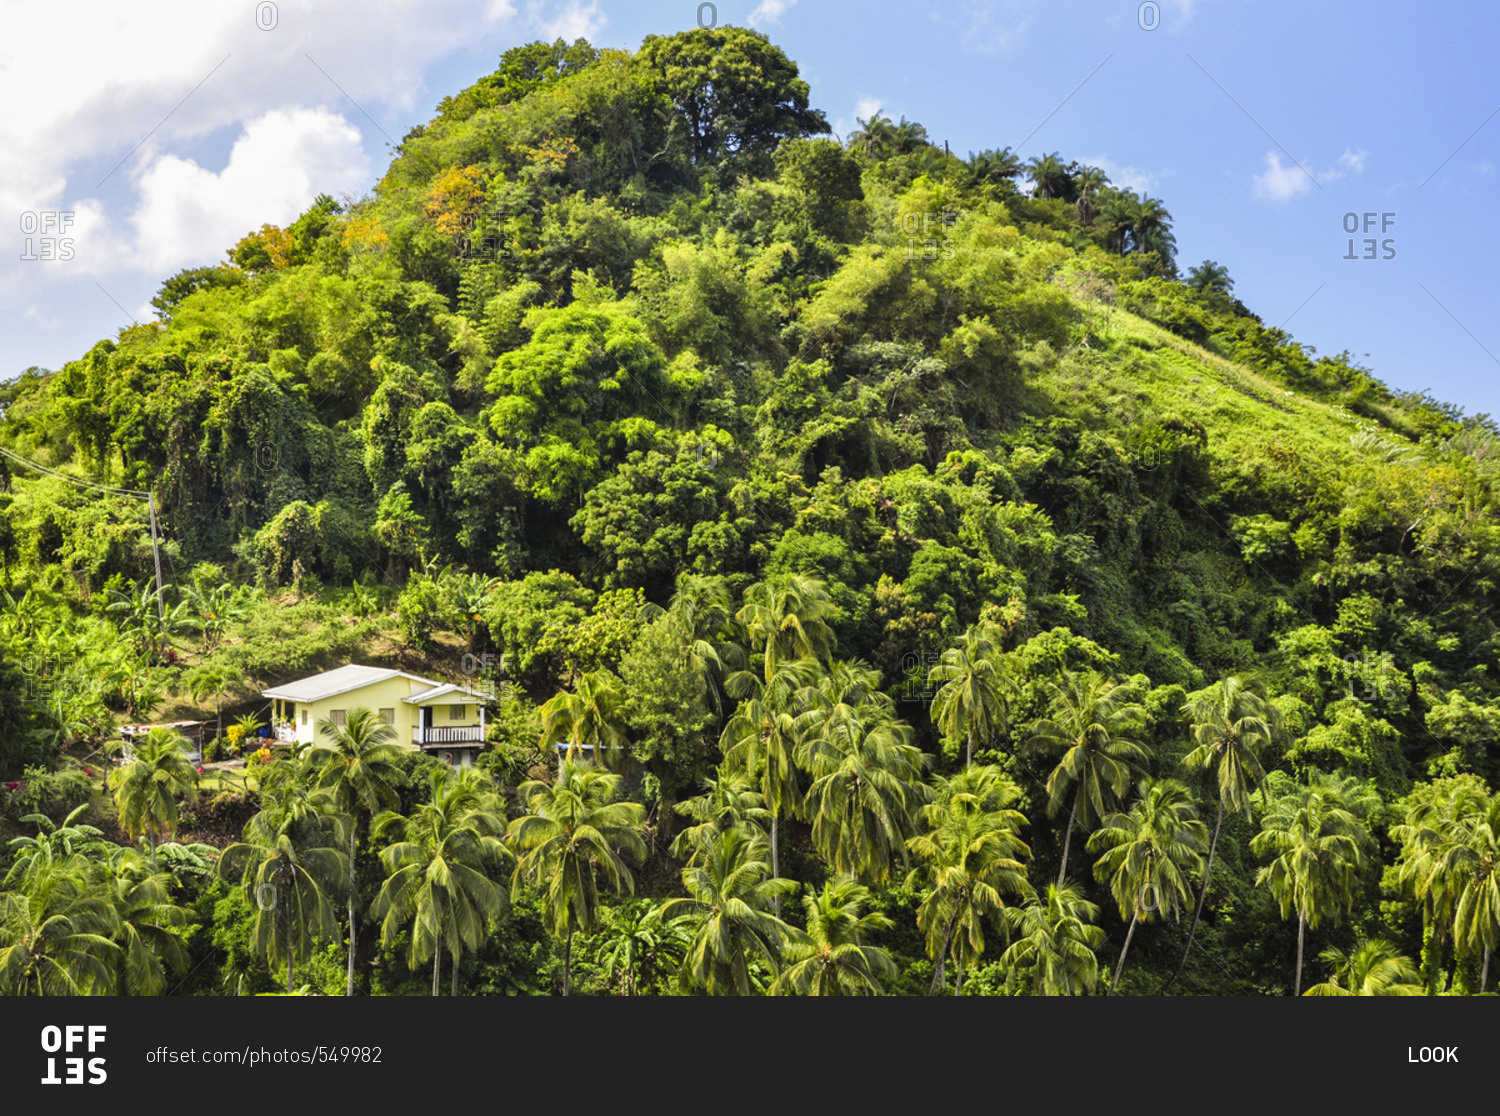 House on a hill in palm tree forest near Kingstown, St. Vincent, Saint Vincent and the Grenadines, Lesser Antilles, West Indies, Windward Islands, Antilles, Caribbean, Central America